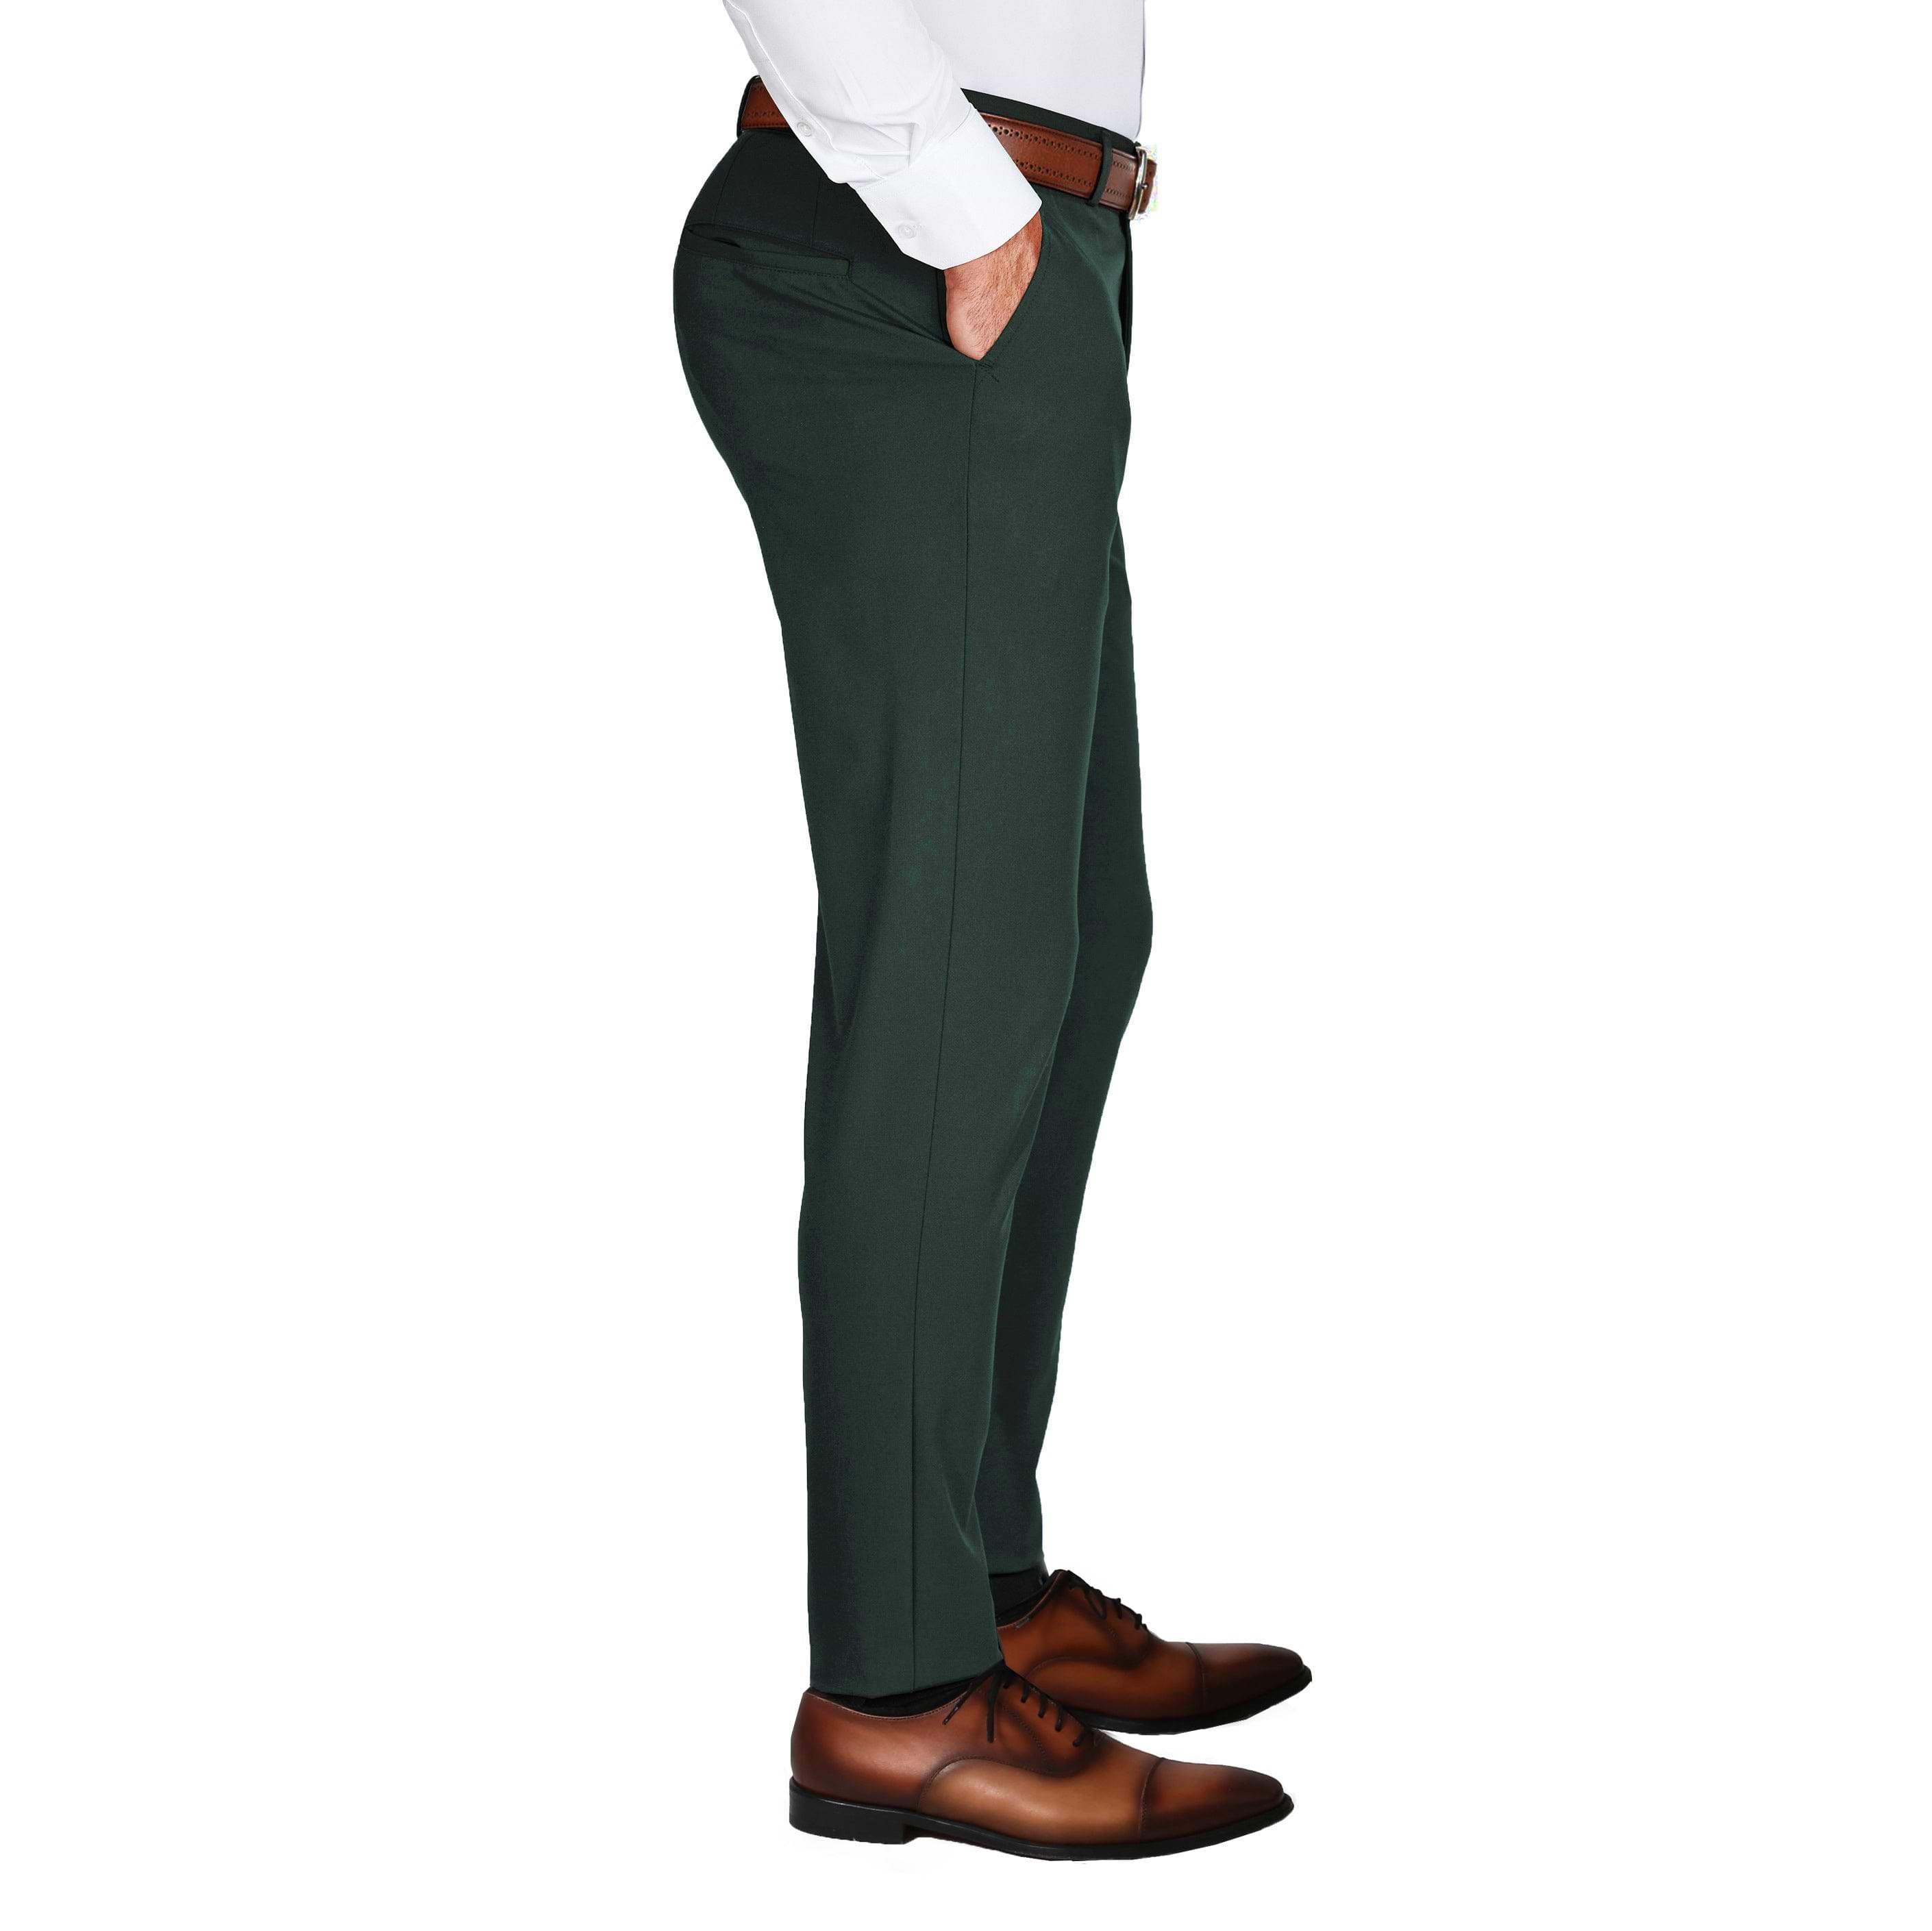 Athletic Fit Stretch Suit Pants - Hunter Green